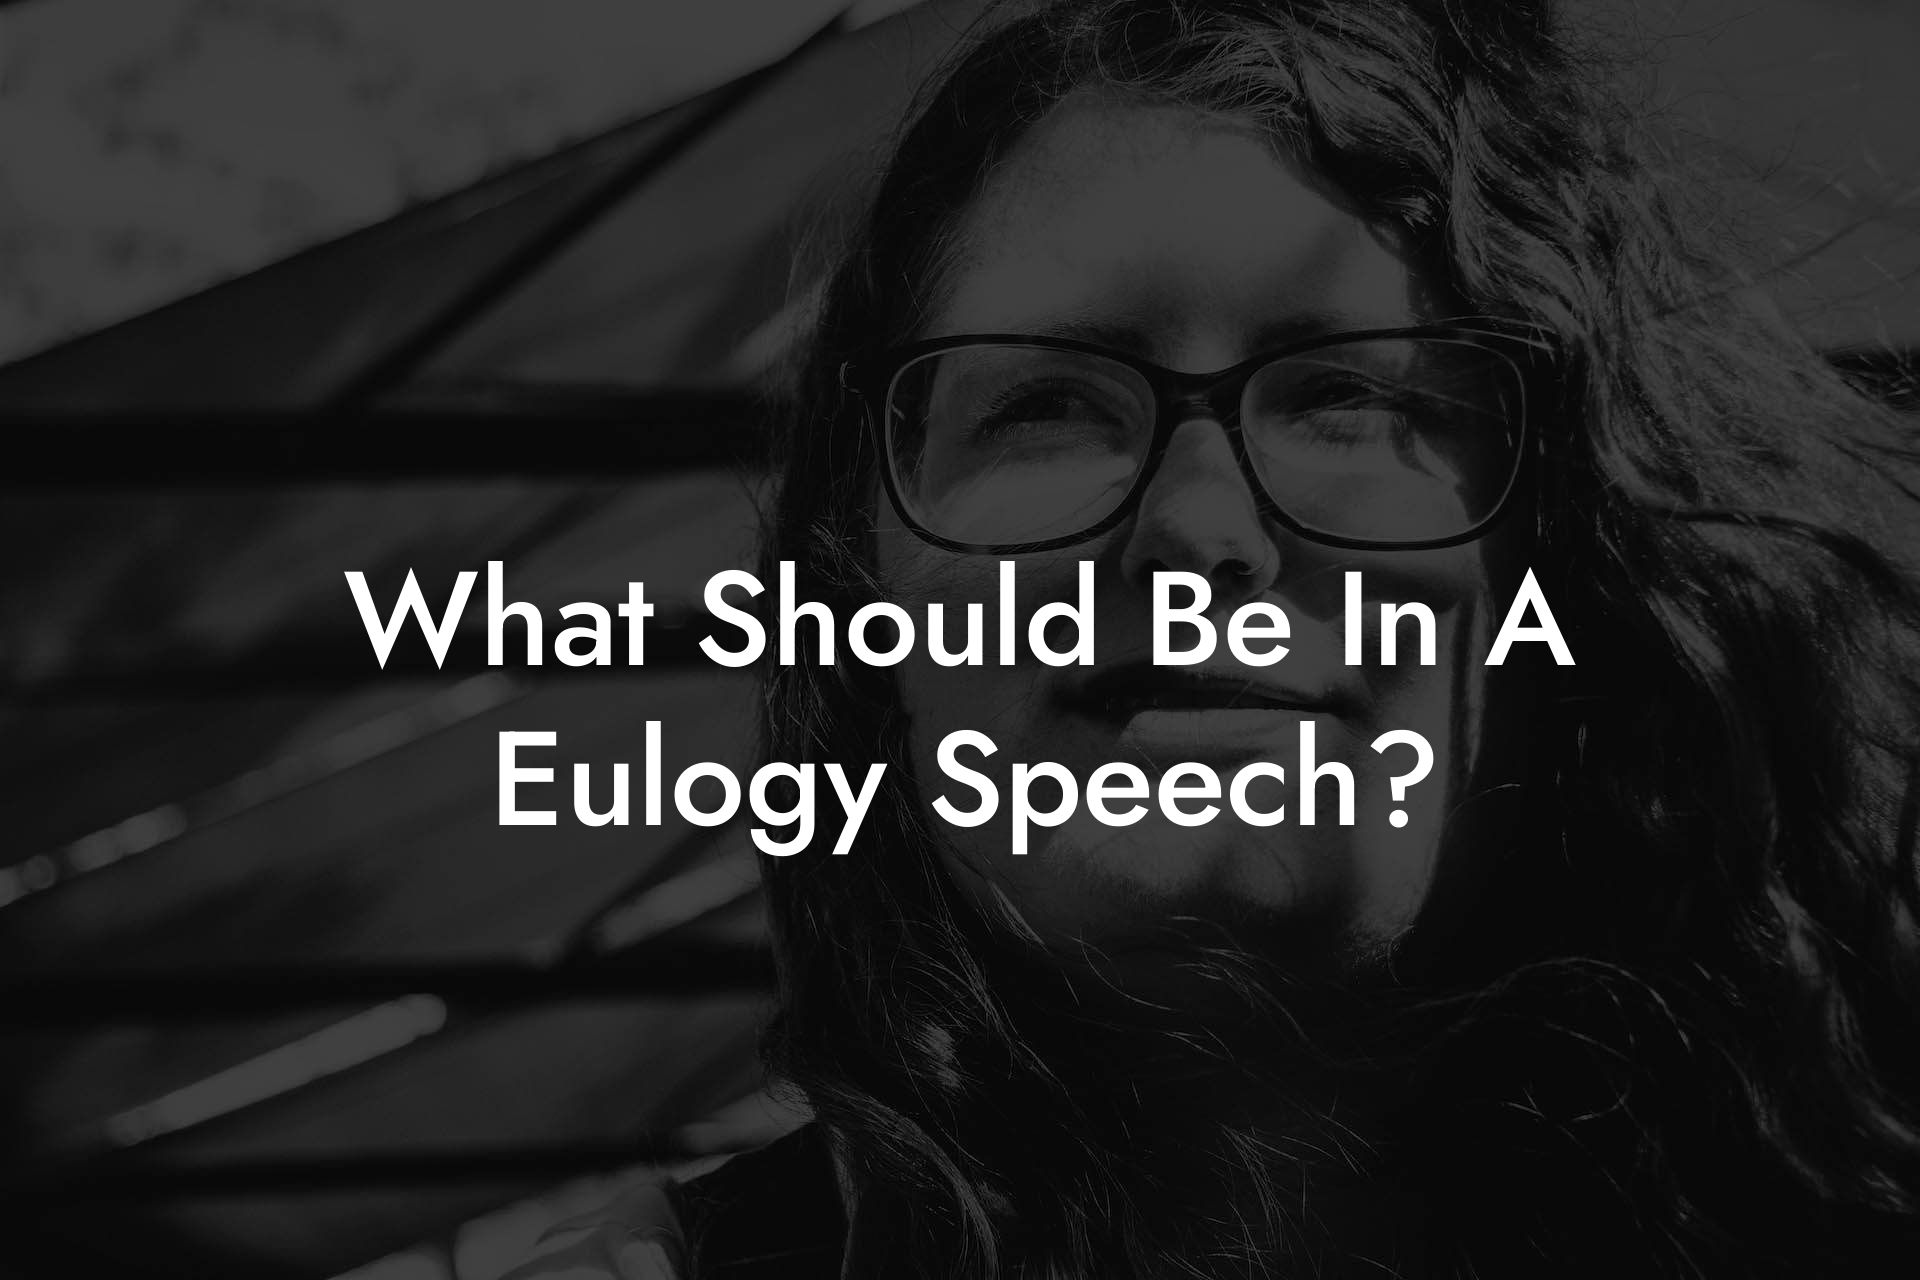 What Should Be In A Eulogy Speech?